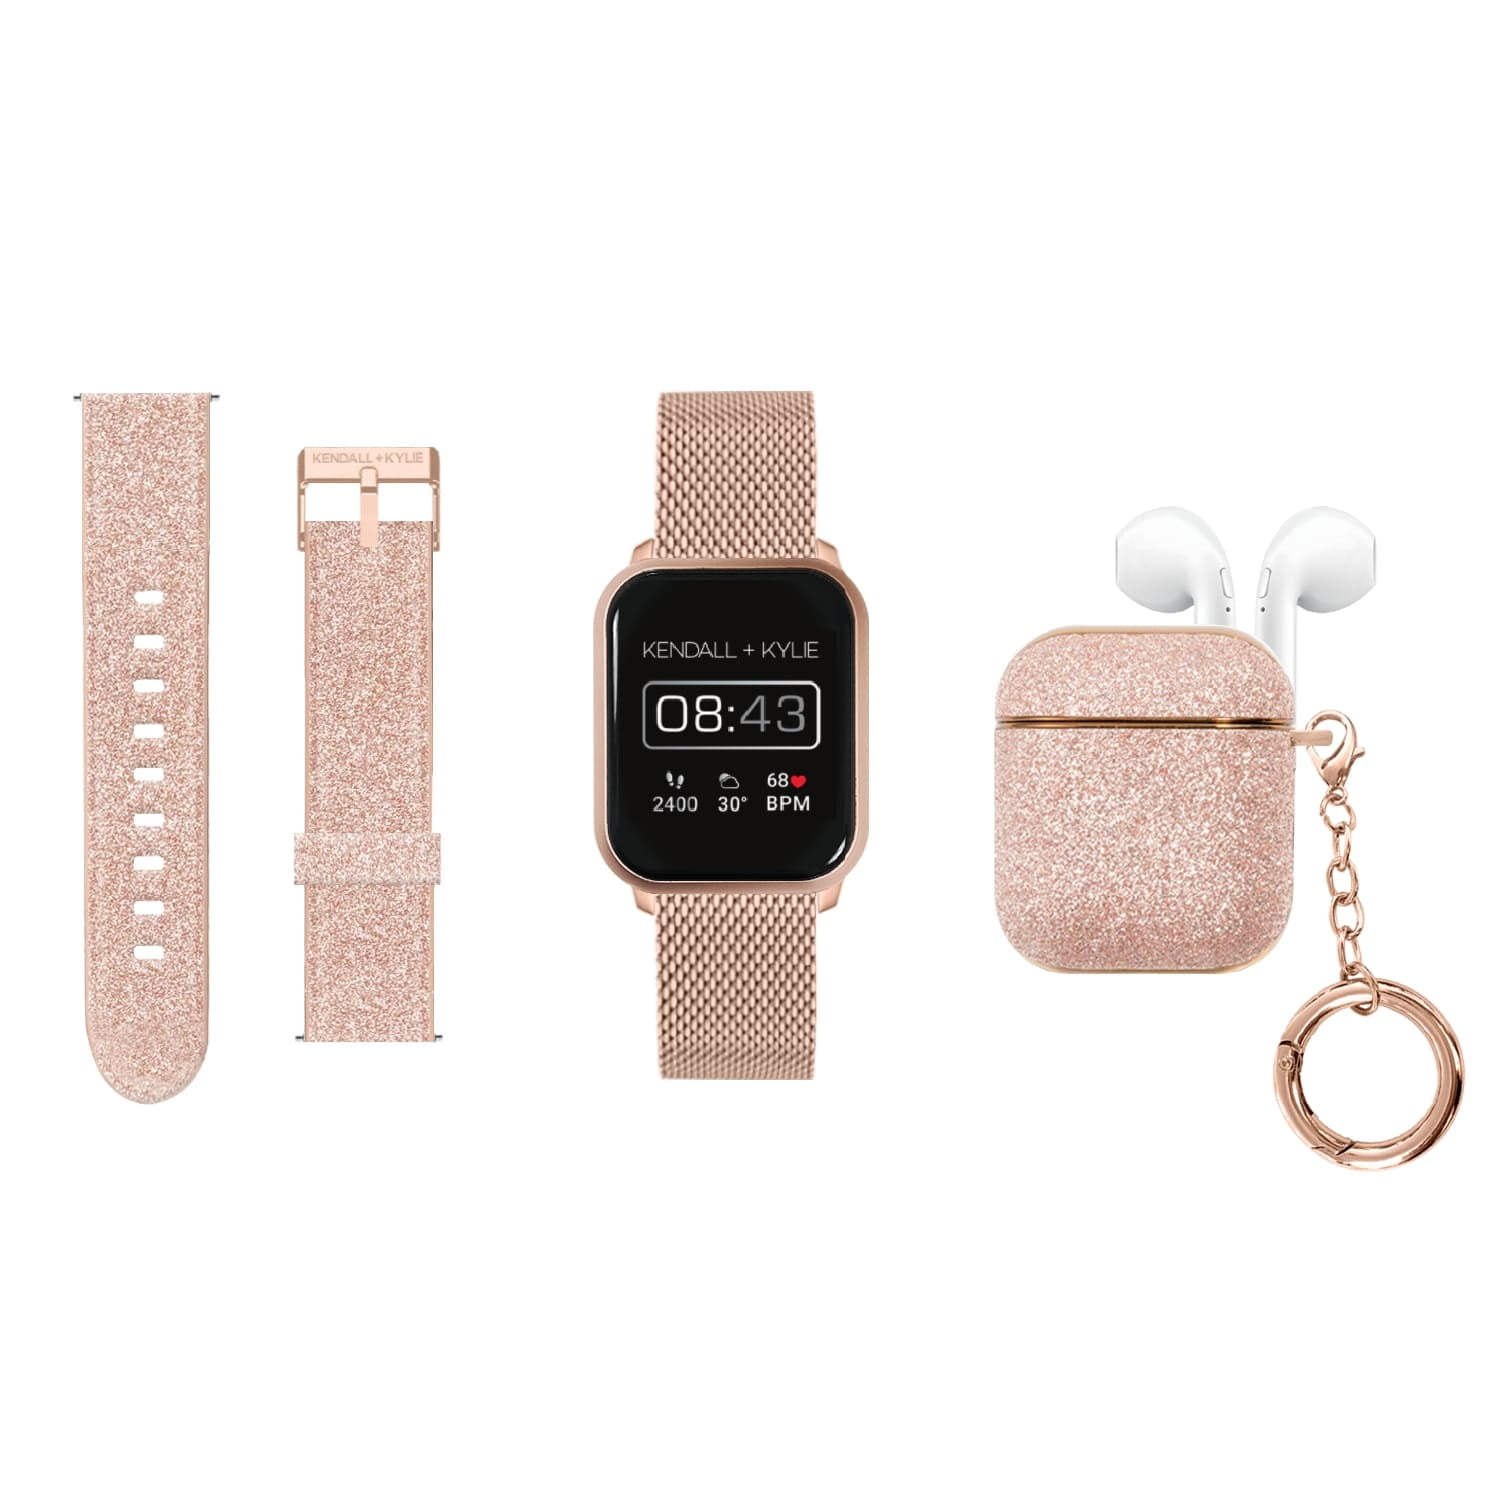 Kendall & Kylie Black/Silver Smart Watch with Interchangeable 